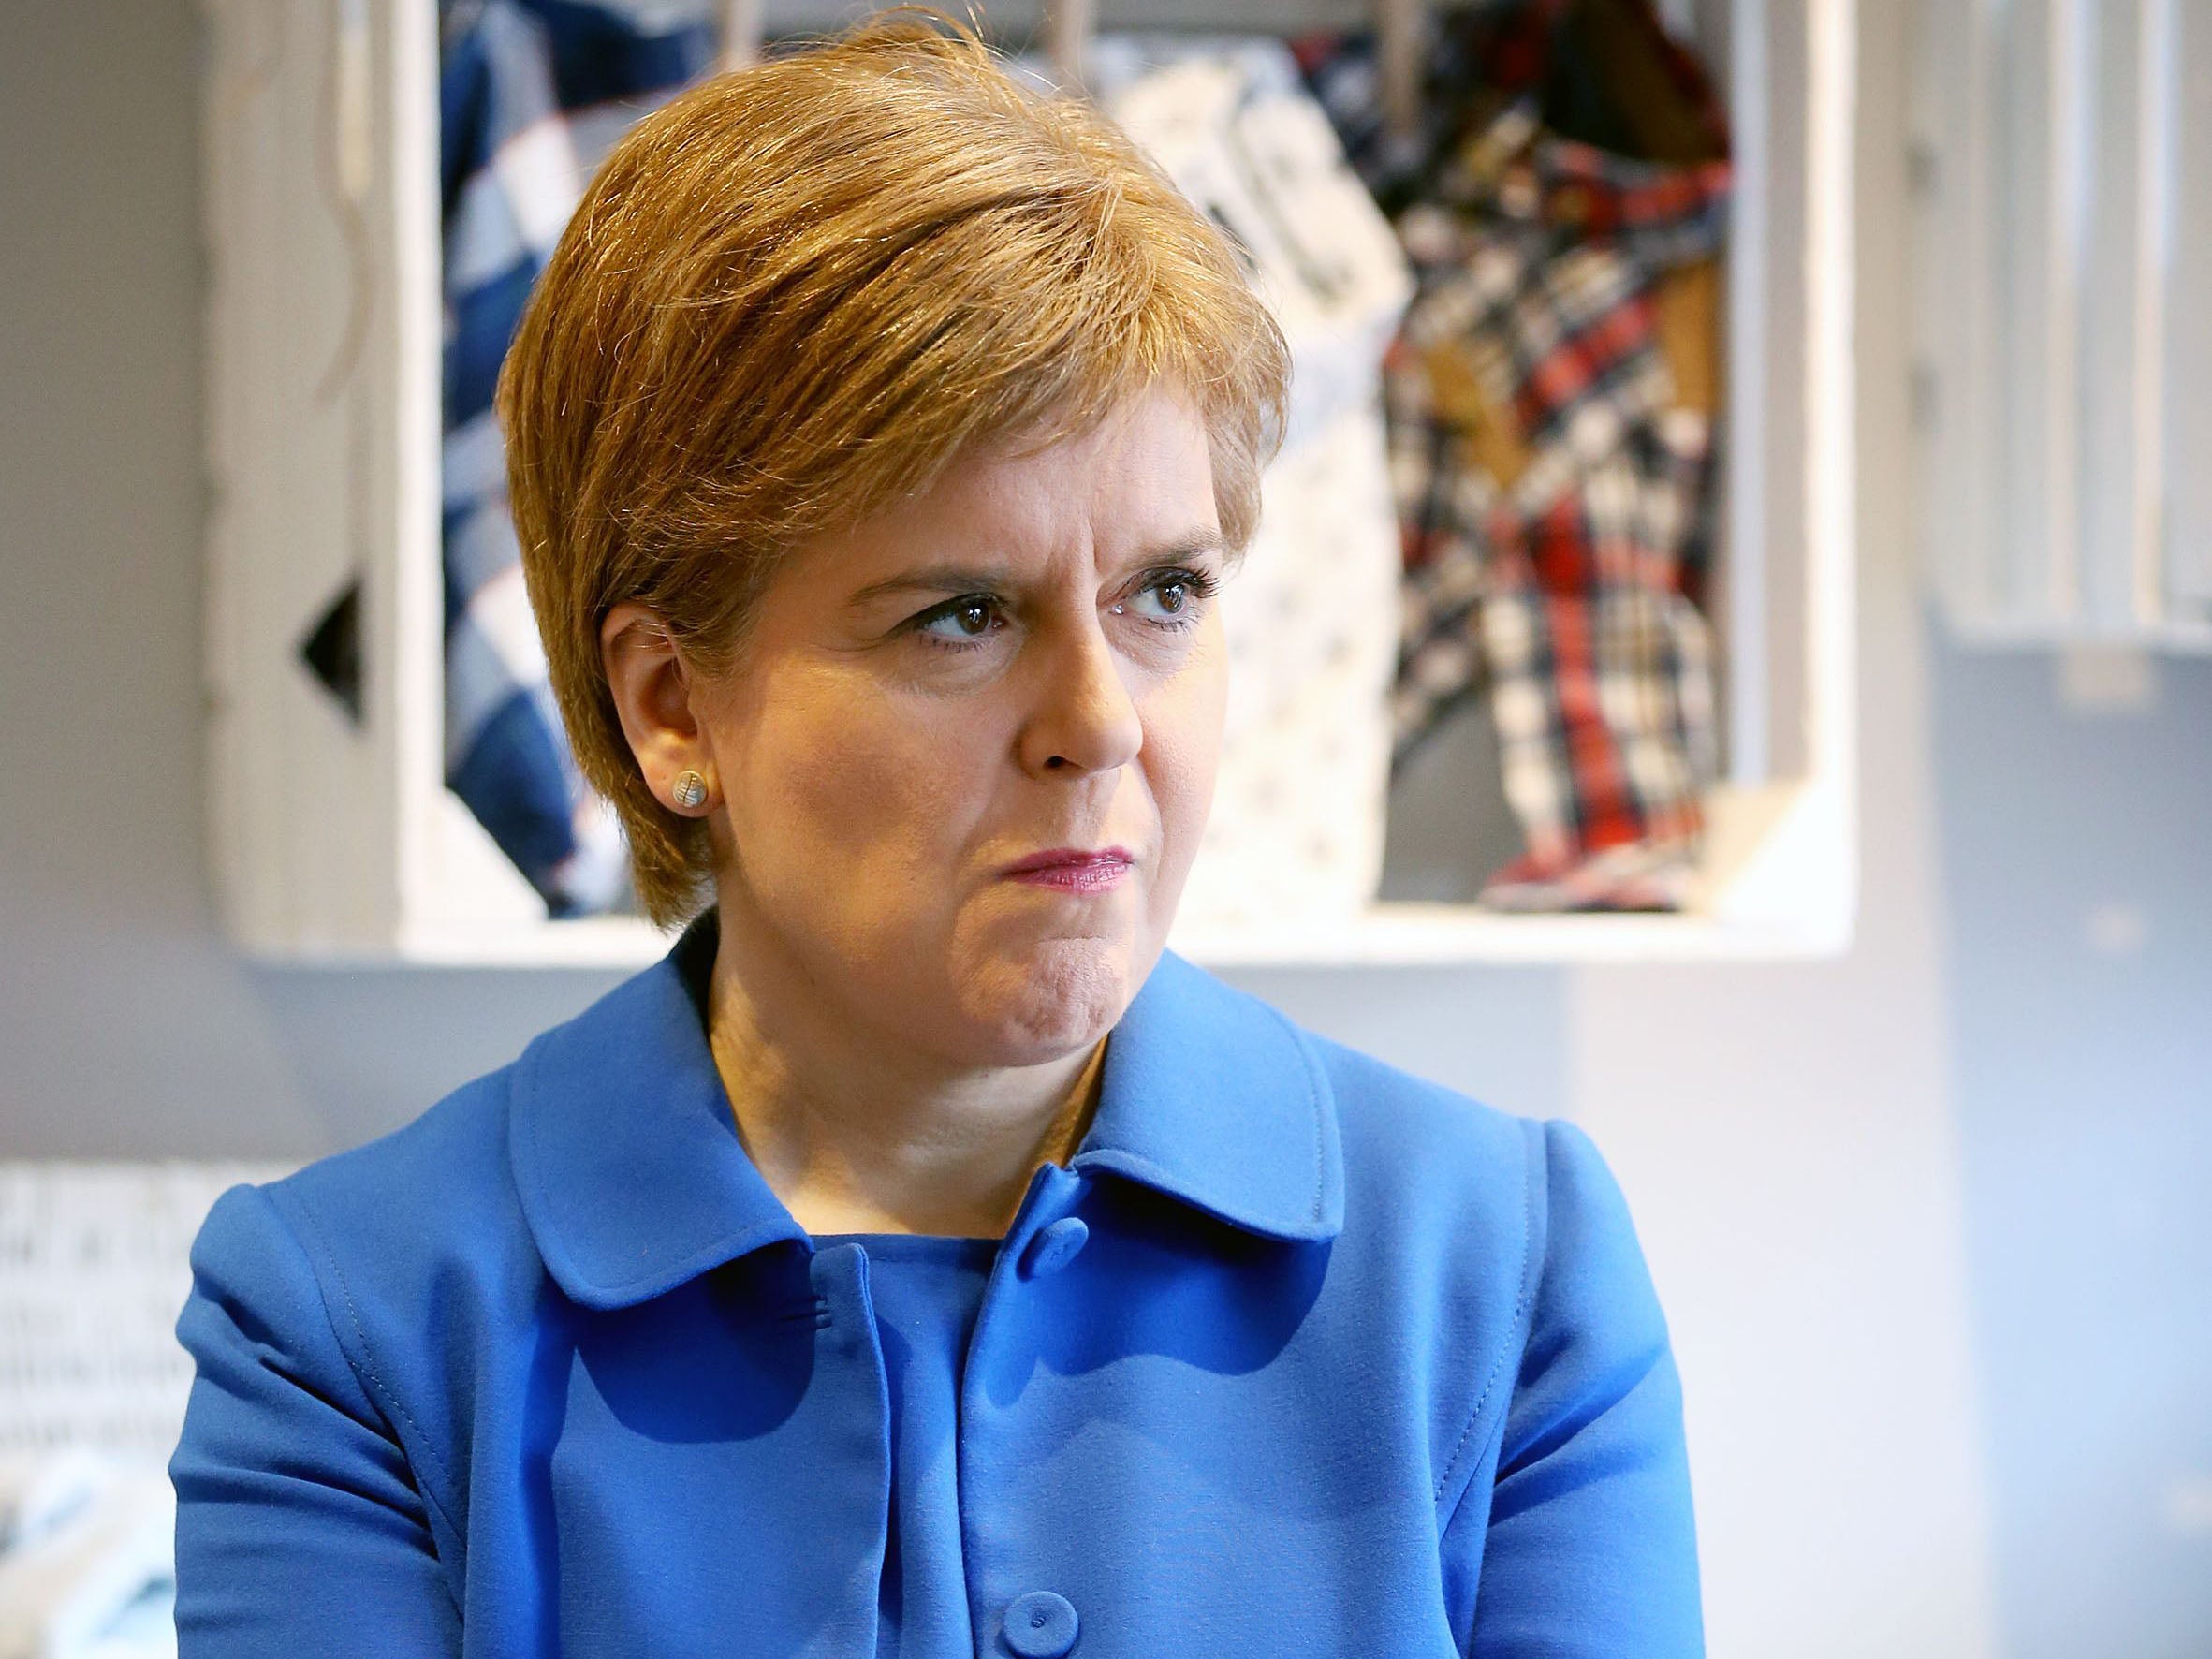 The First Minister says Scotland should be offered a choice between independence and Theresa May’s plan